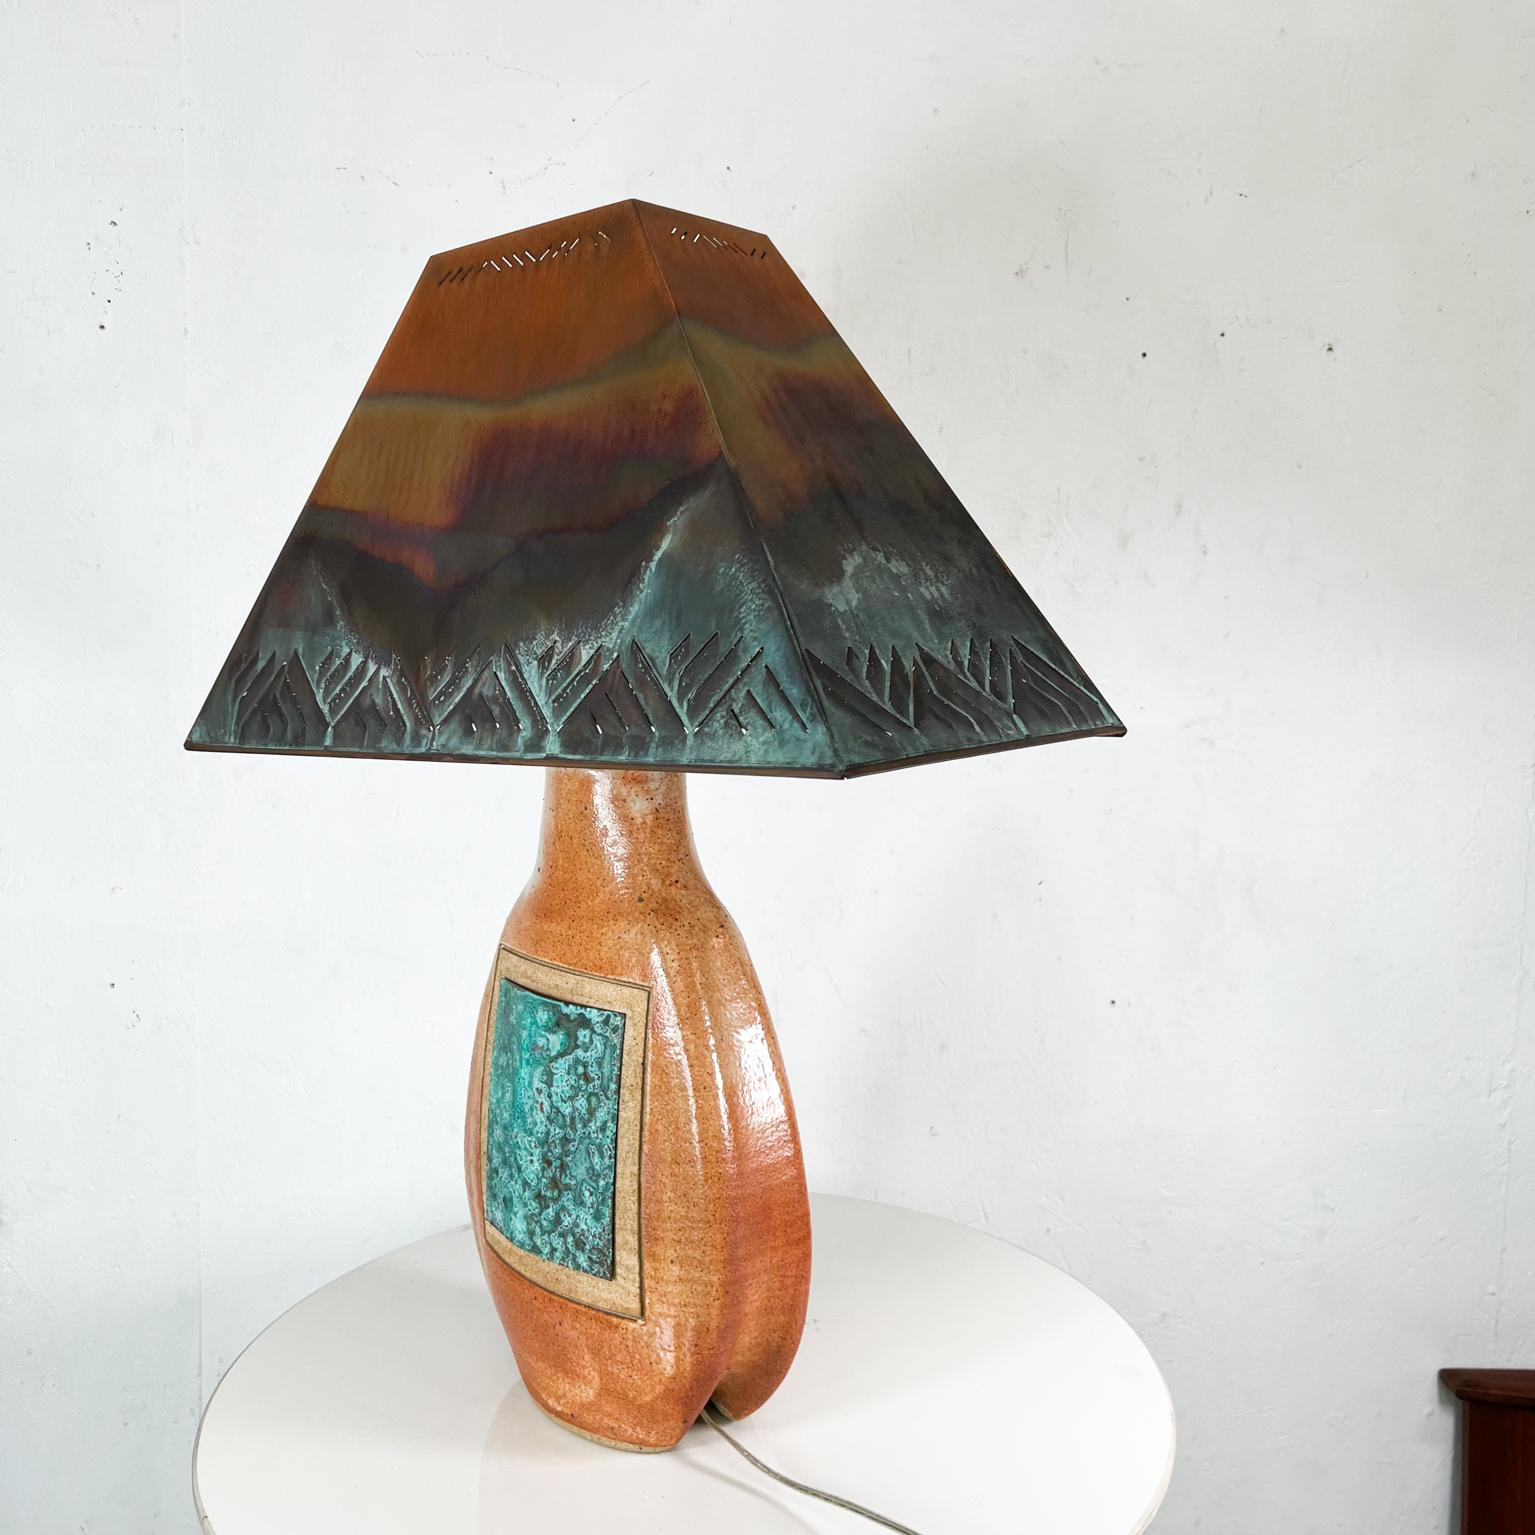 2014 New Mexico Art Pottery W. Kohler Co Table Lamp & Shade Patinated Copper 12